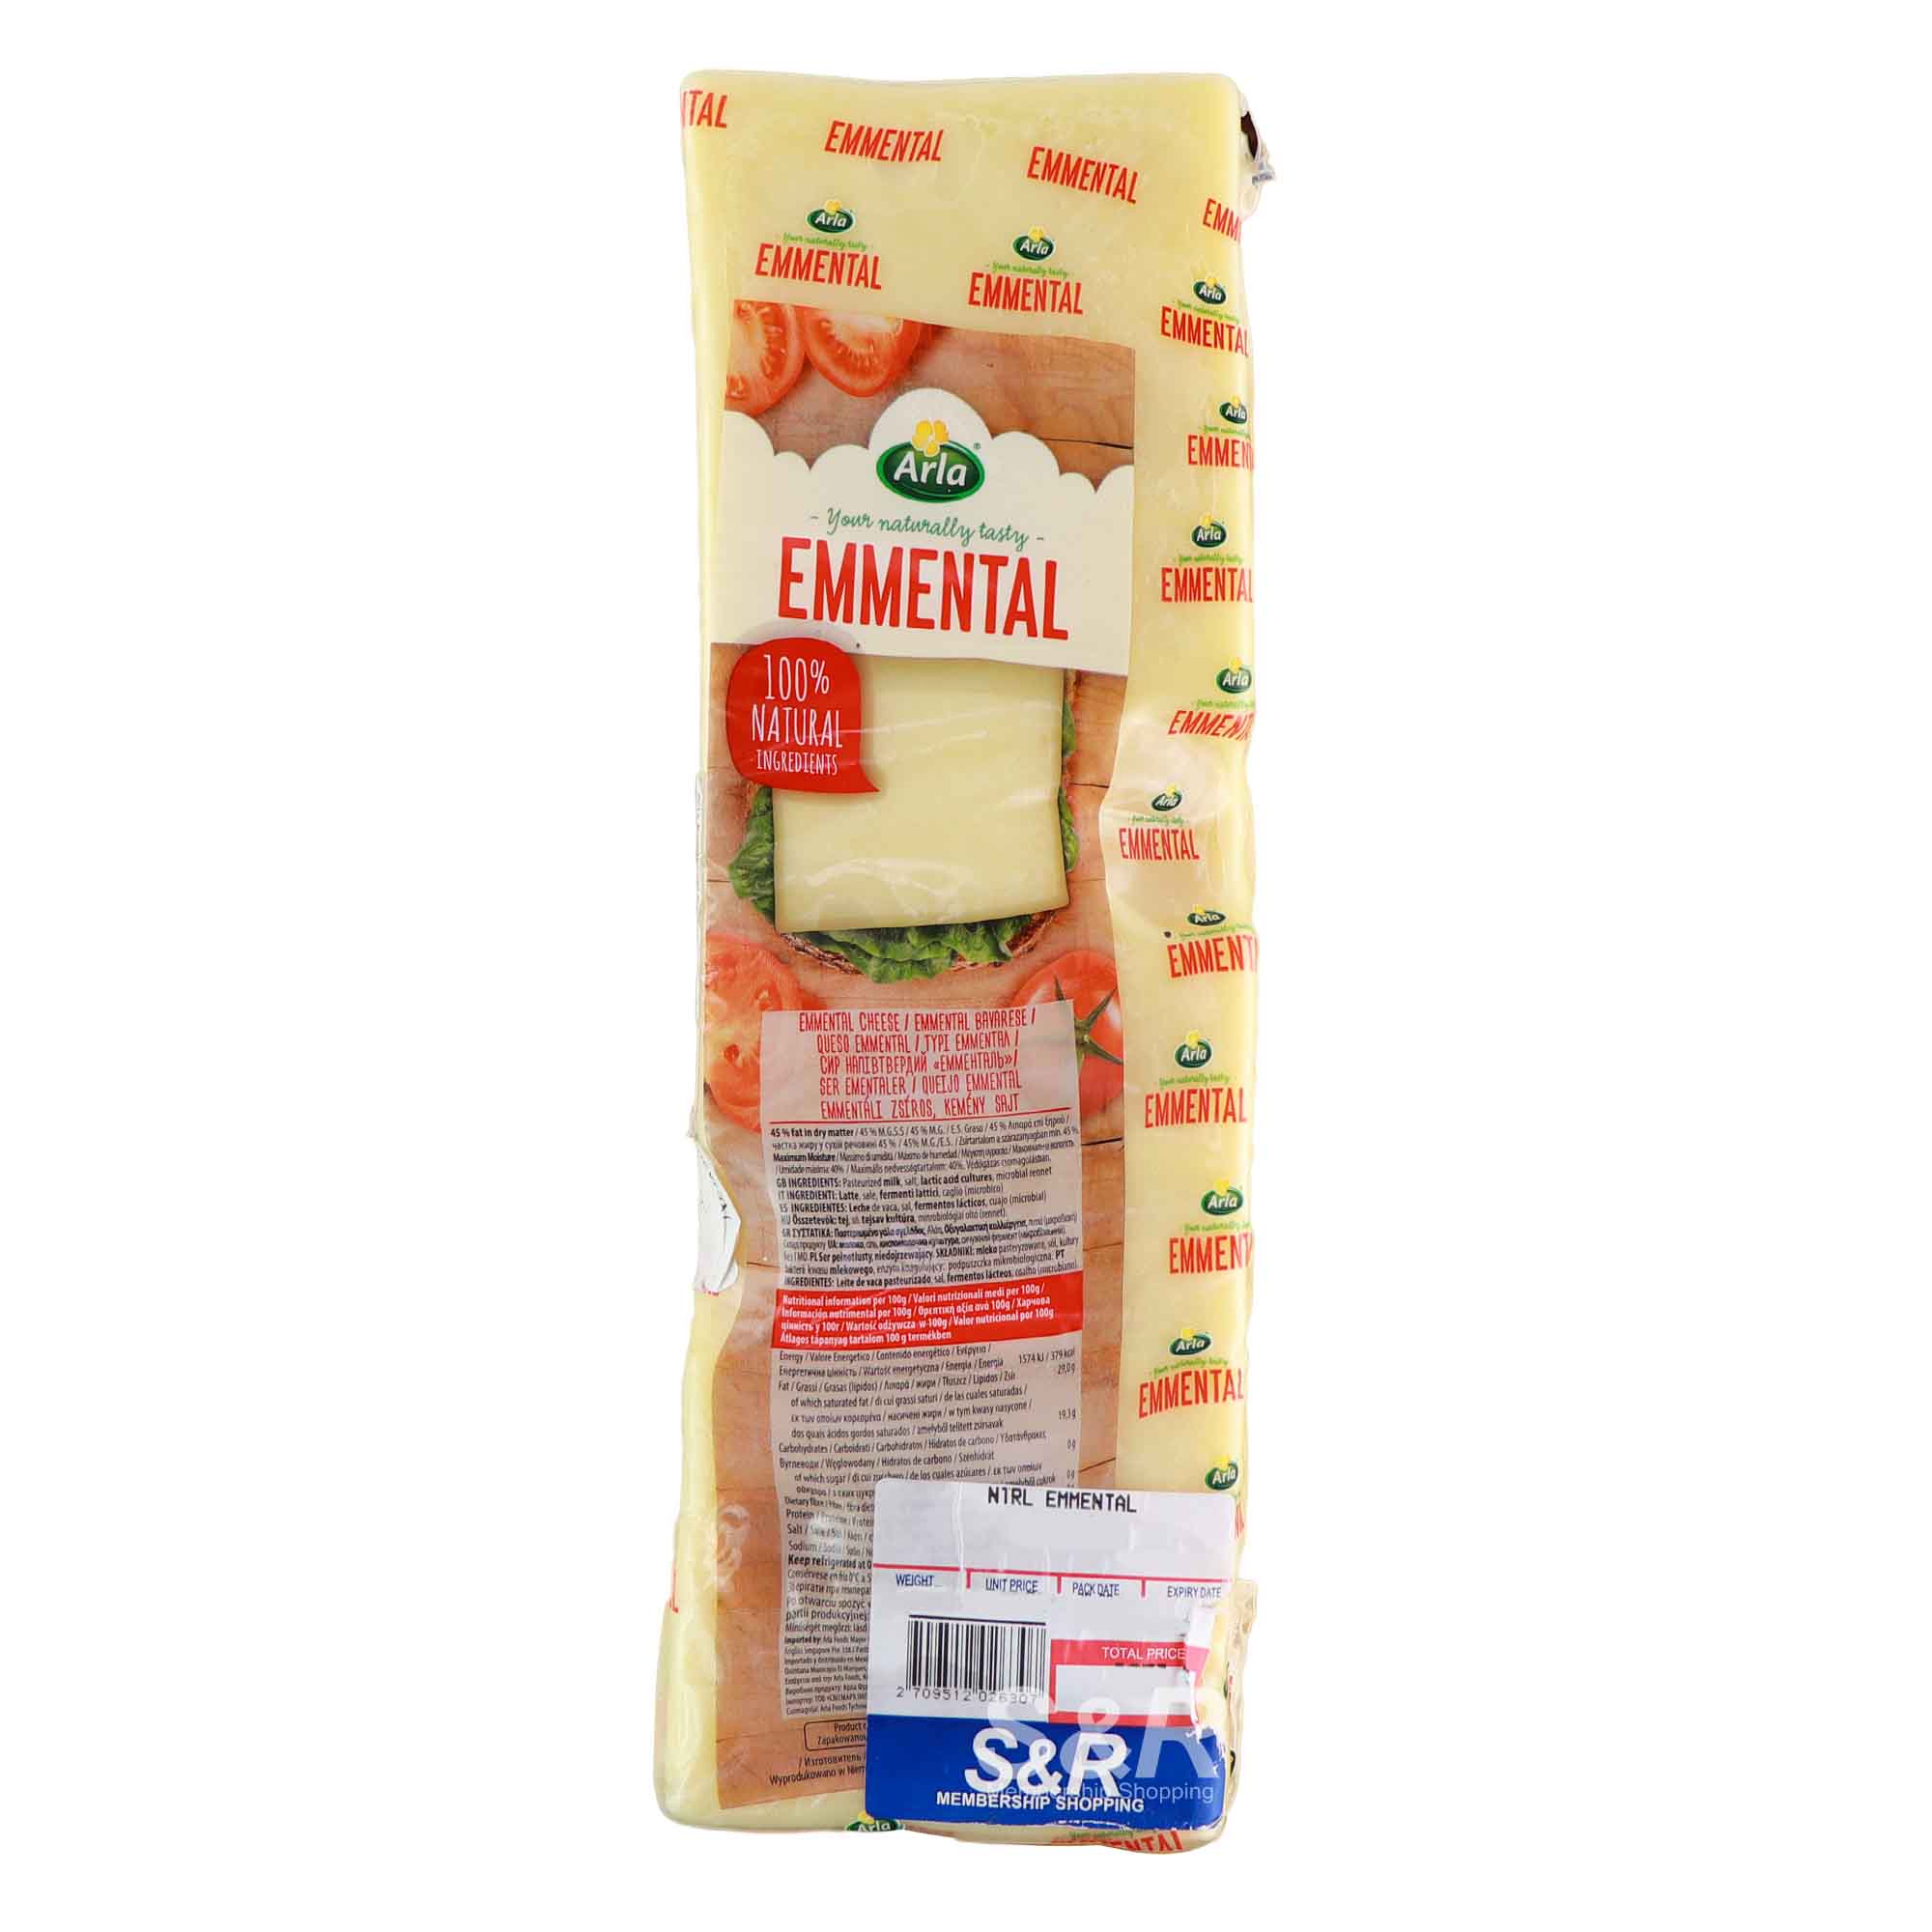 Arla Emmental Cheese approx. 2.7kg